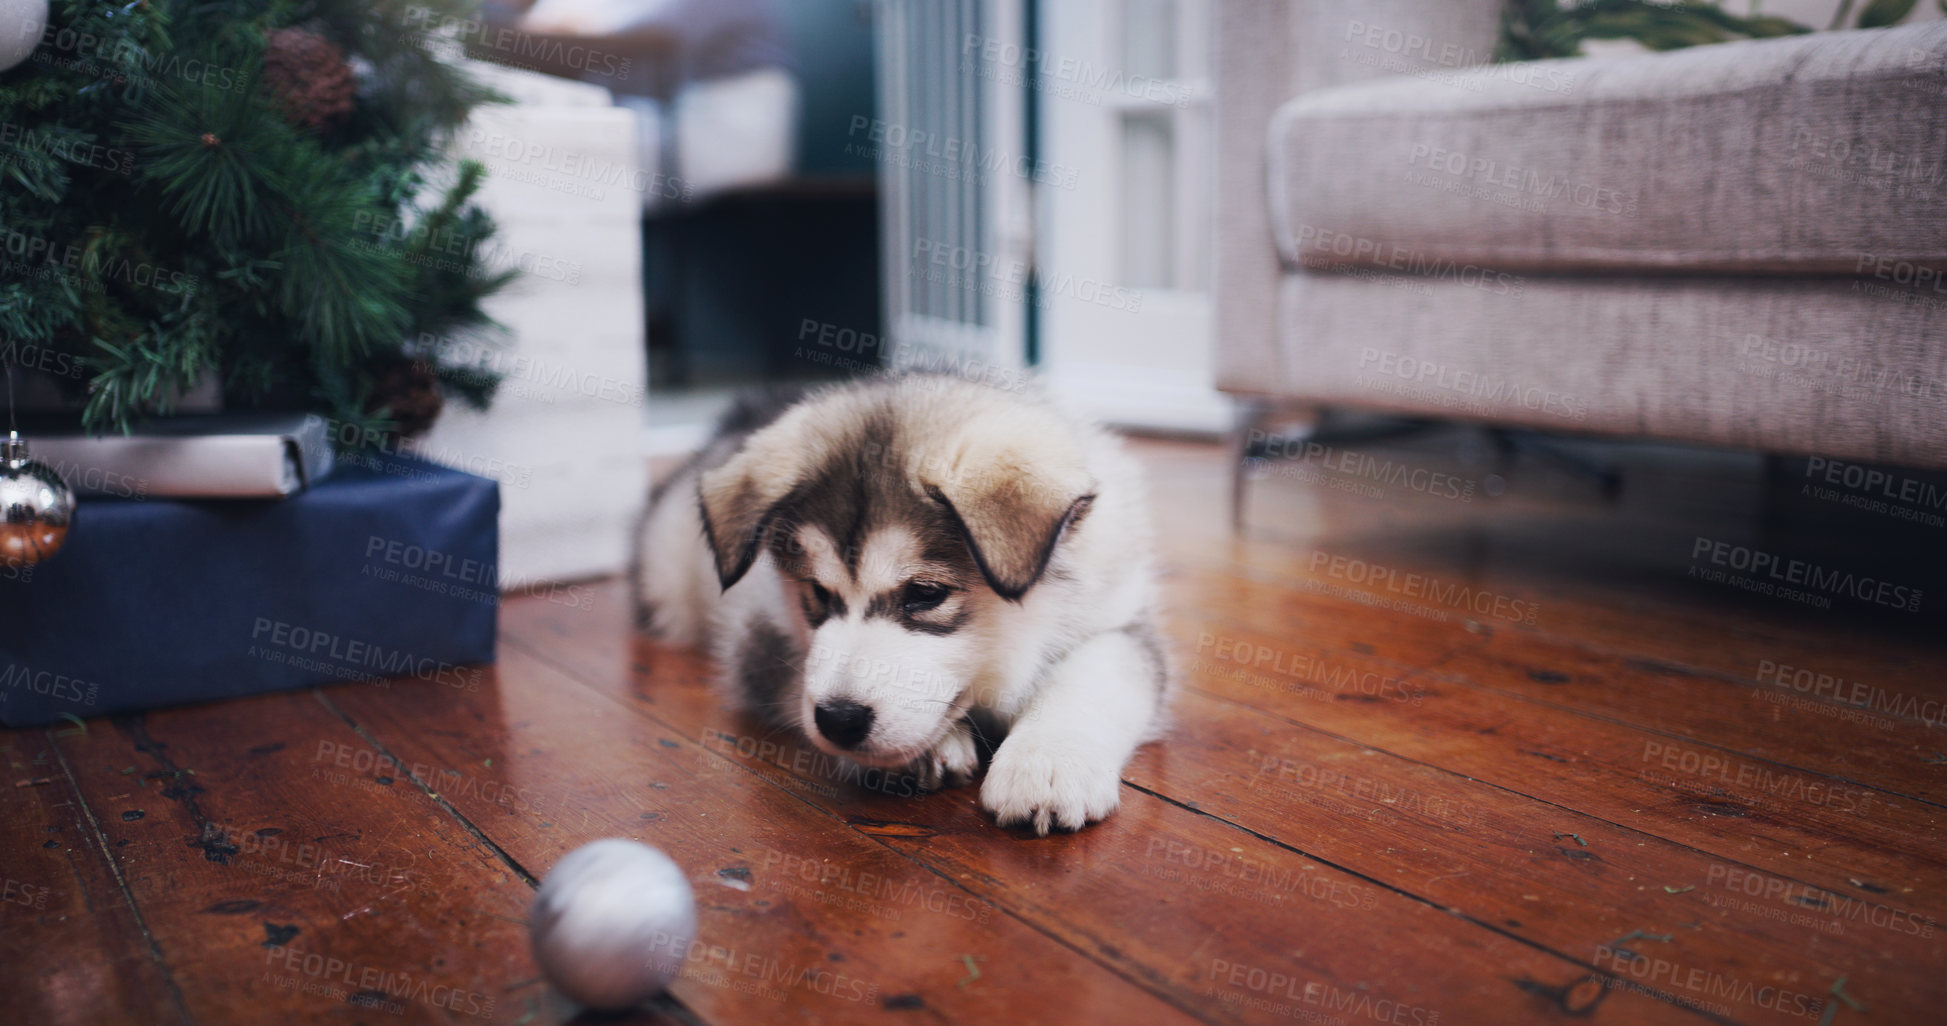 Buy stock photo Christmas, curious and husky dog in home interested in festive decoration on living room floor. Puppy, cute and traditional holiday celebration tree ornament in Vancouver, Canada house.

